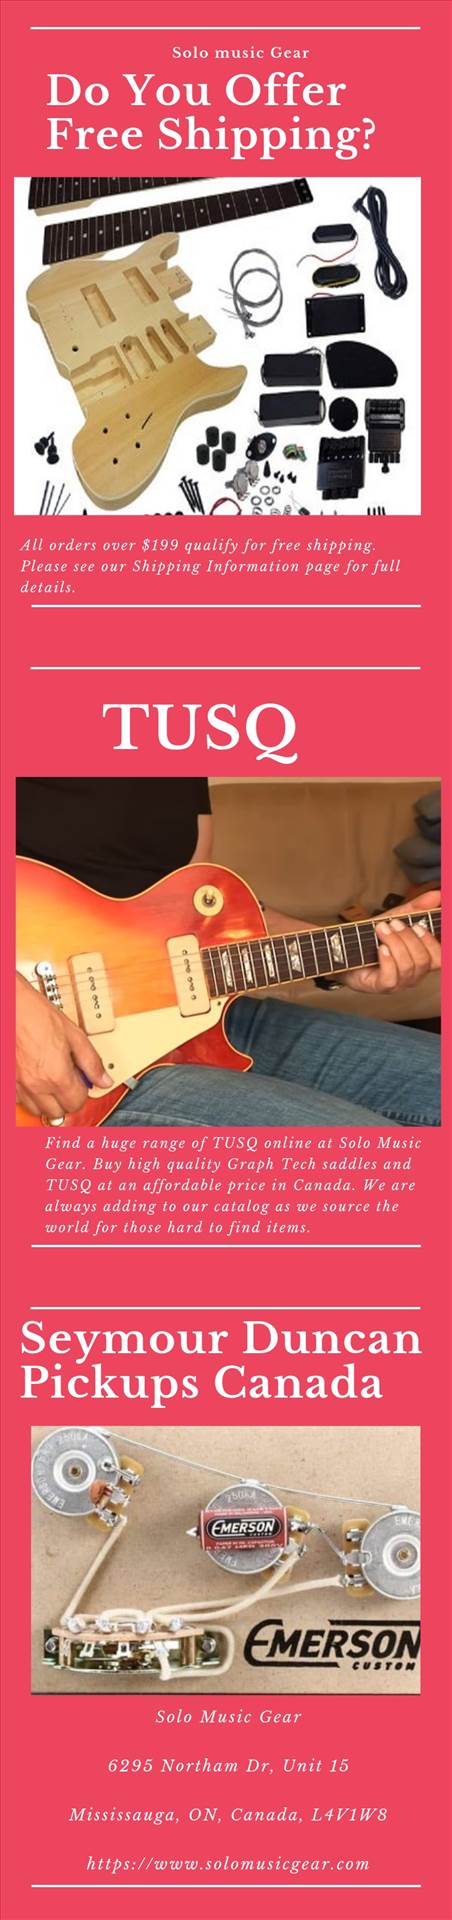 Do You Offer Free Shipping.jpg  by Solomusicgear